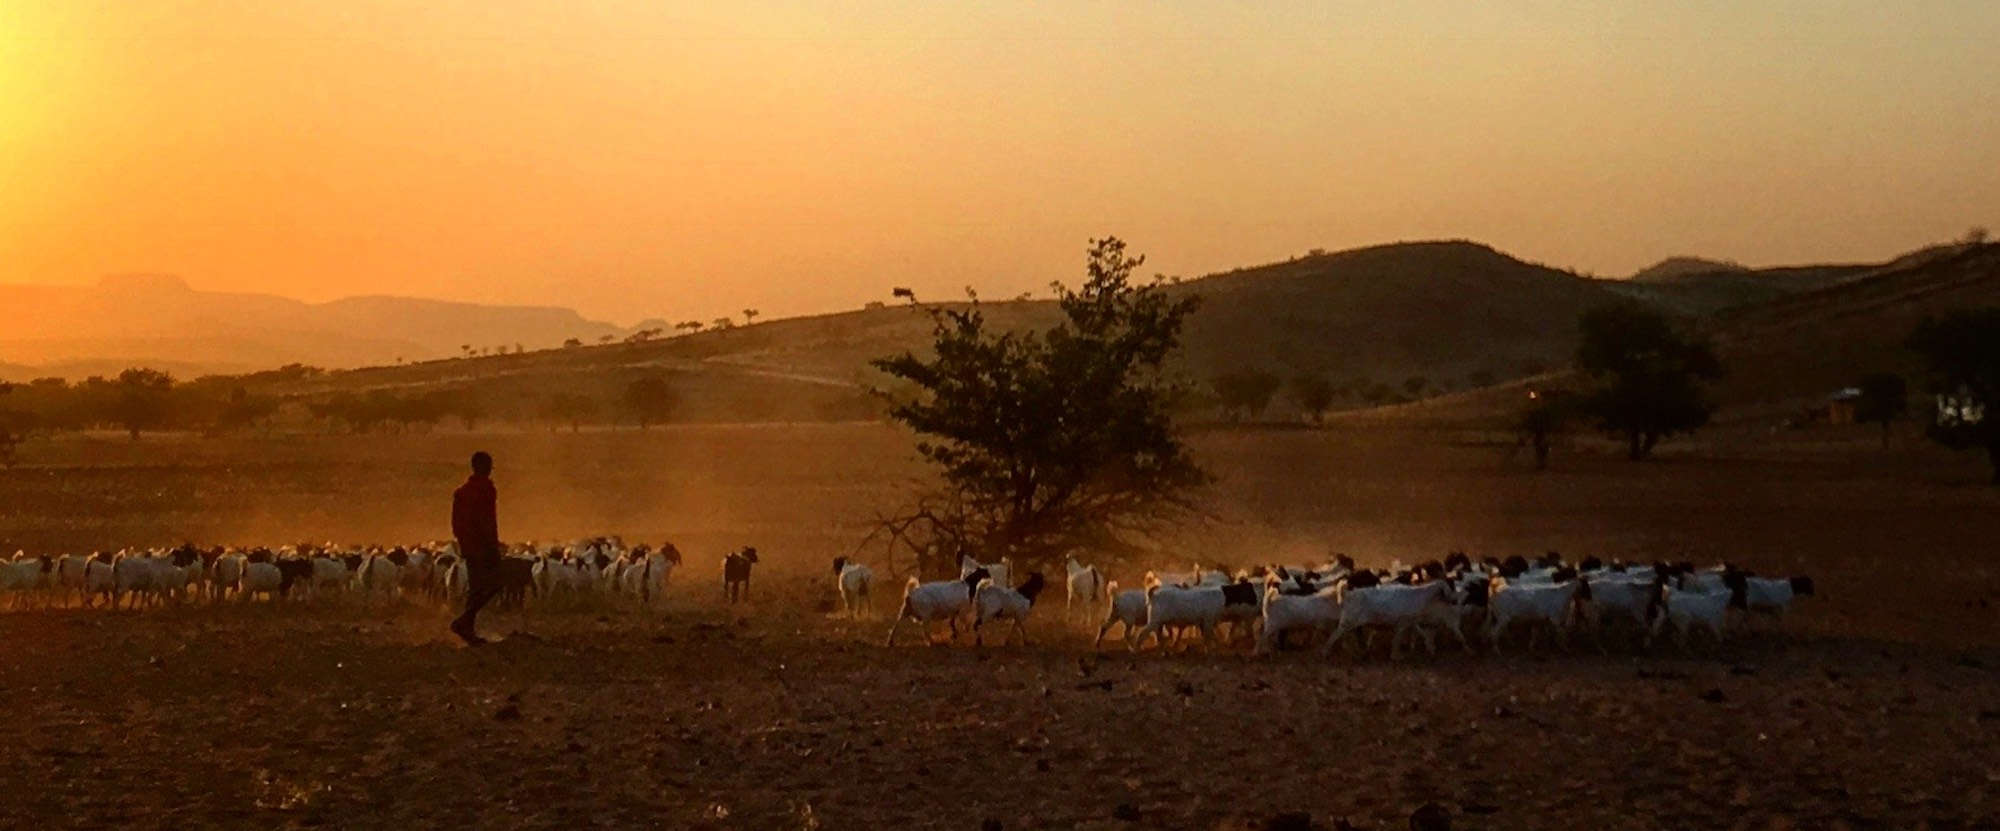 A lone herder walks with a large number of goats as the sun rises in the background.